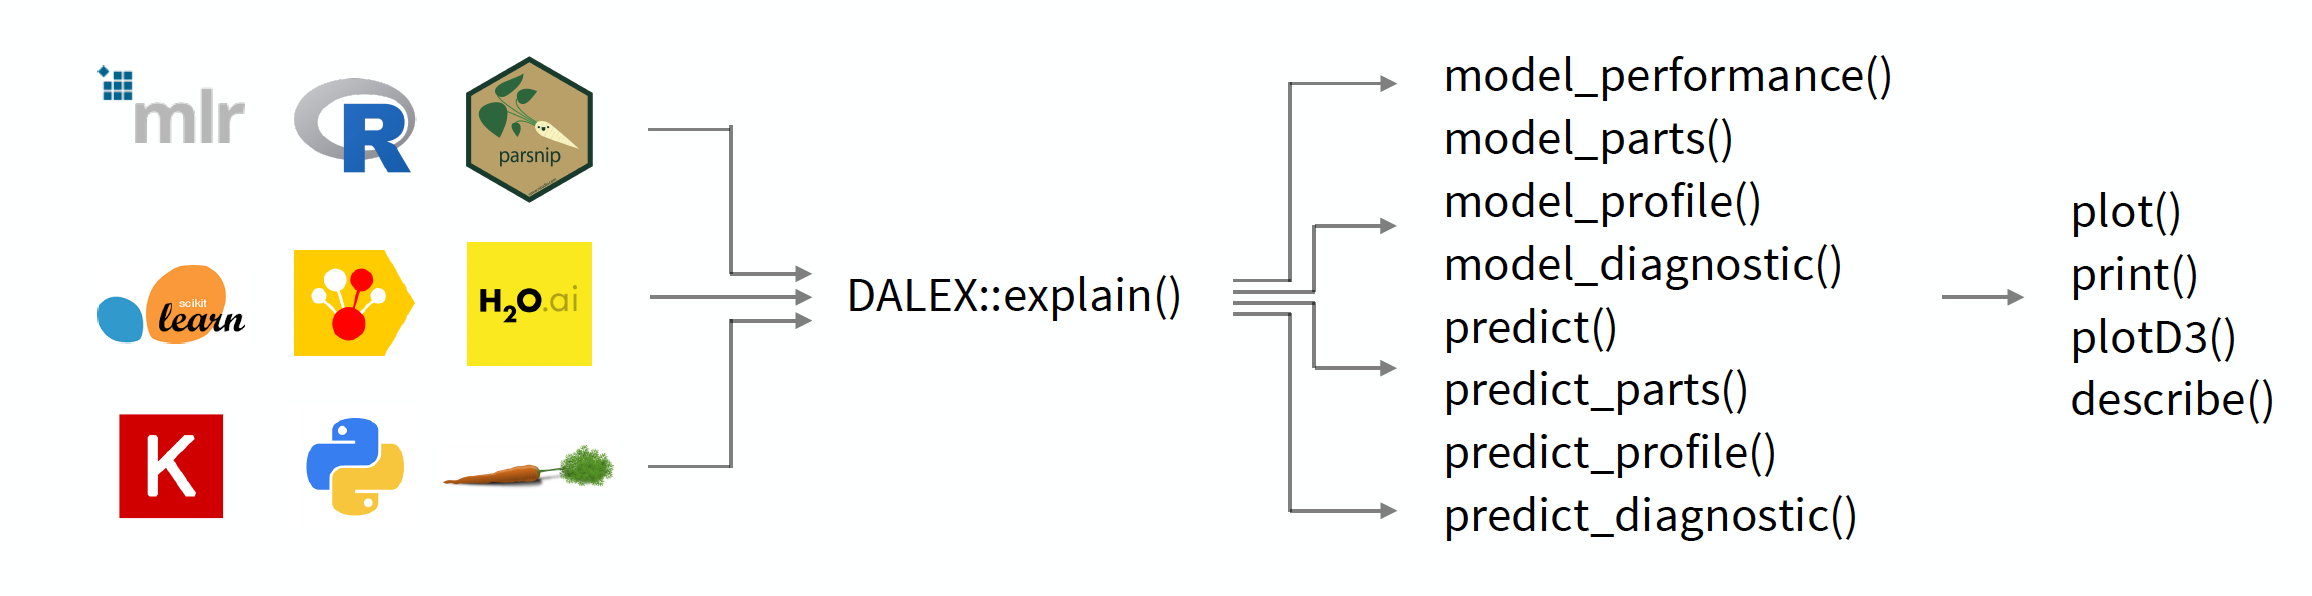 The DALEX package creates a layer of abstraction around models, allowing you to work with different models in a uniform way. The key function is the explain() function, which wraps any model into a uniform interface. Then other functions from the DALEX package can be applied to the resulting object to explore the model.